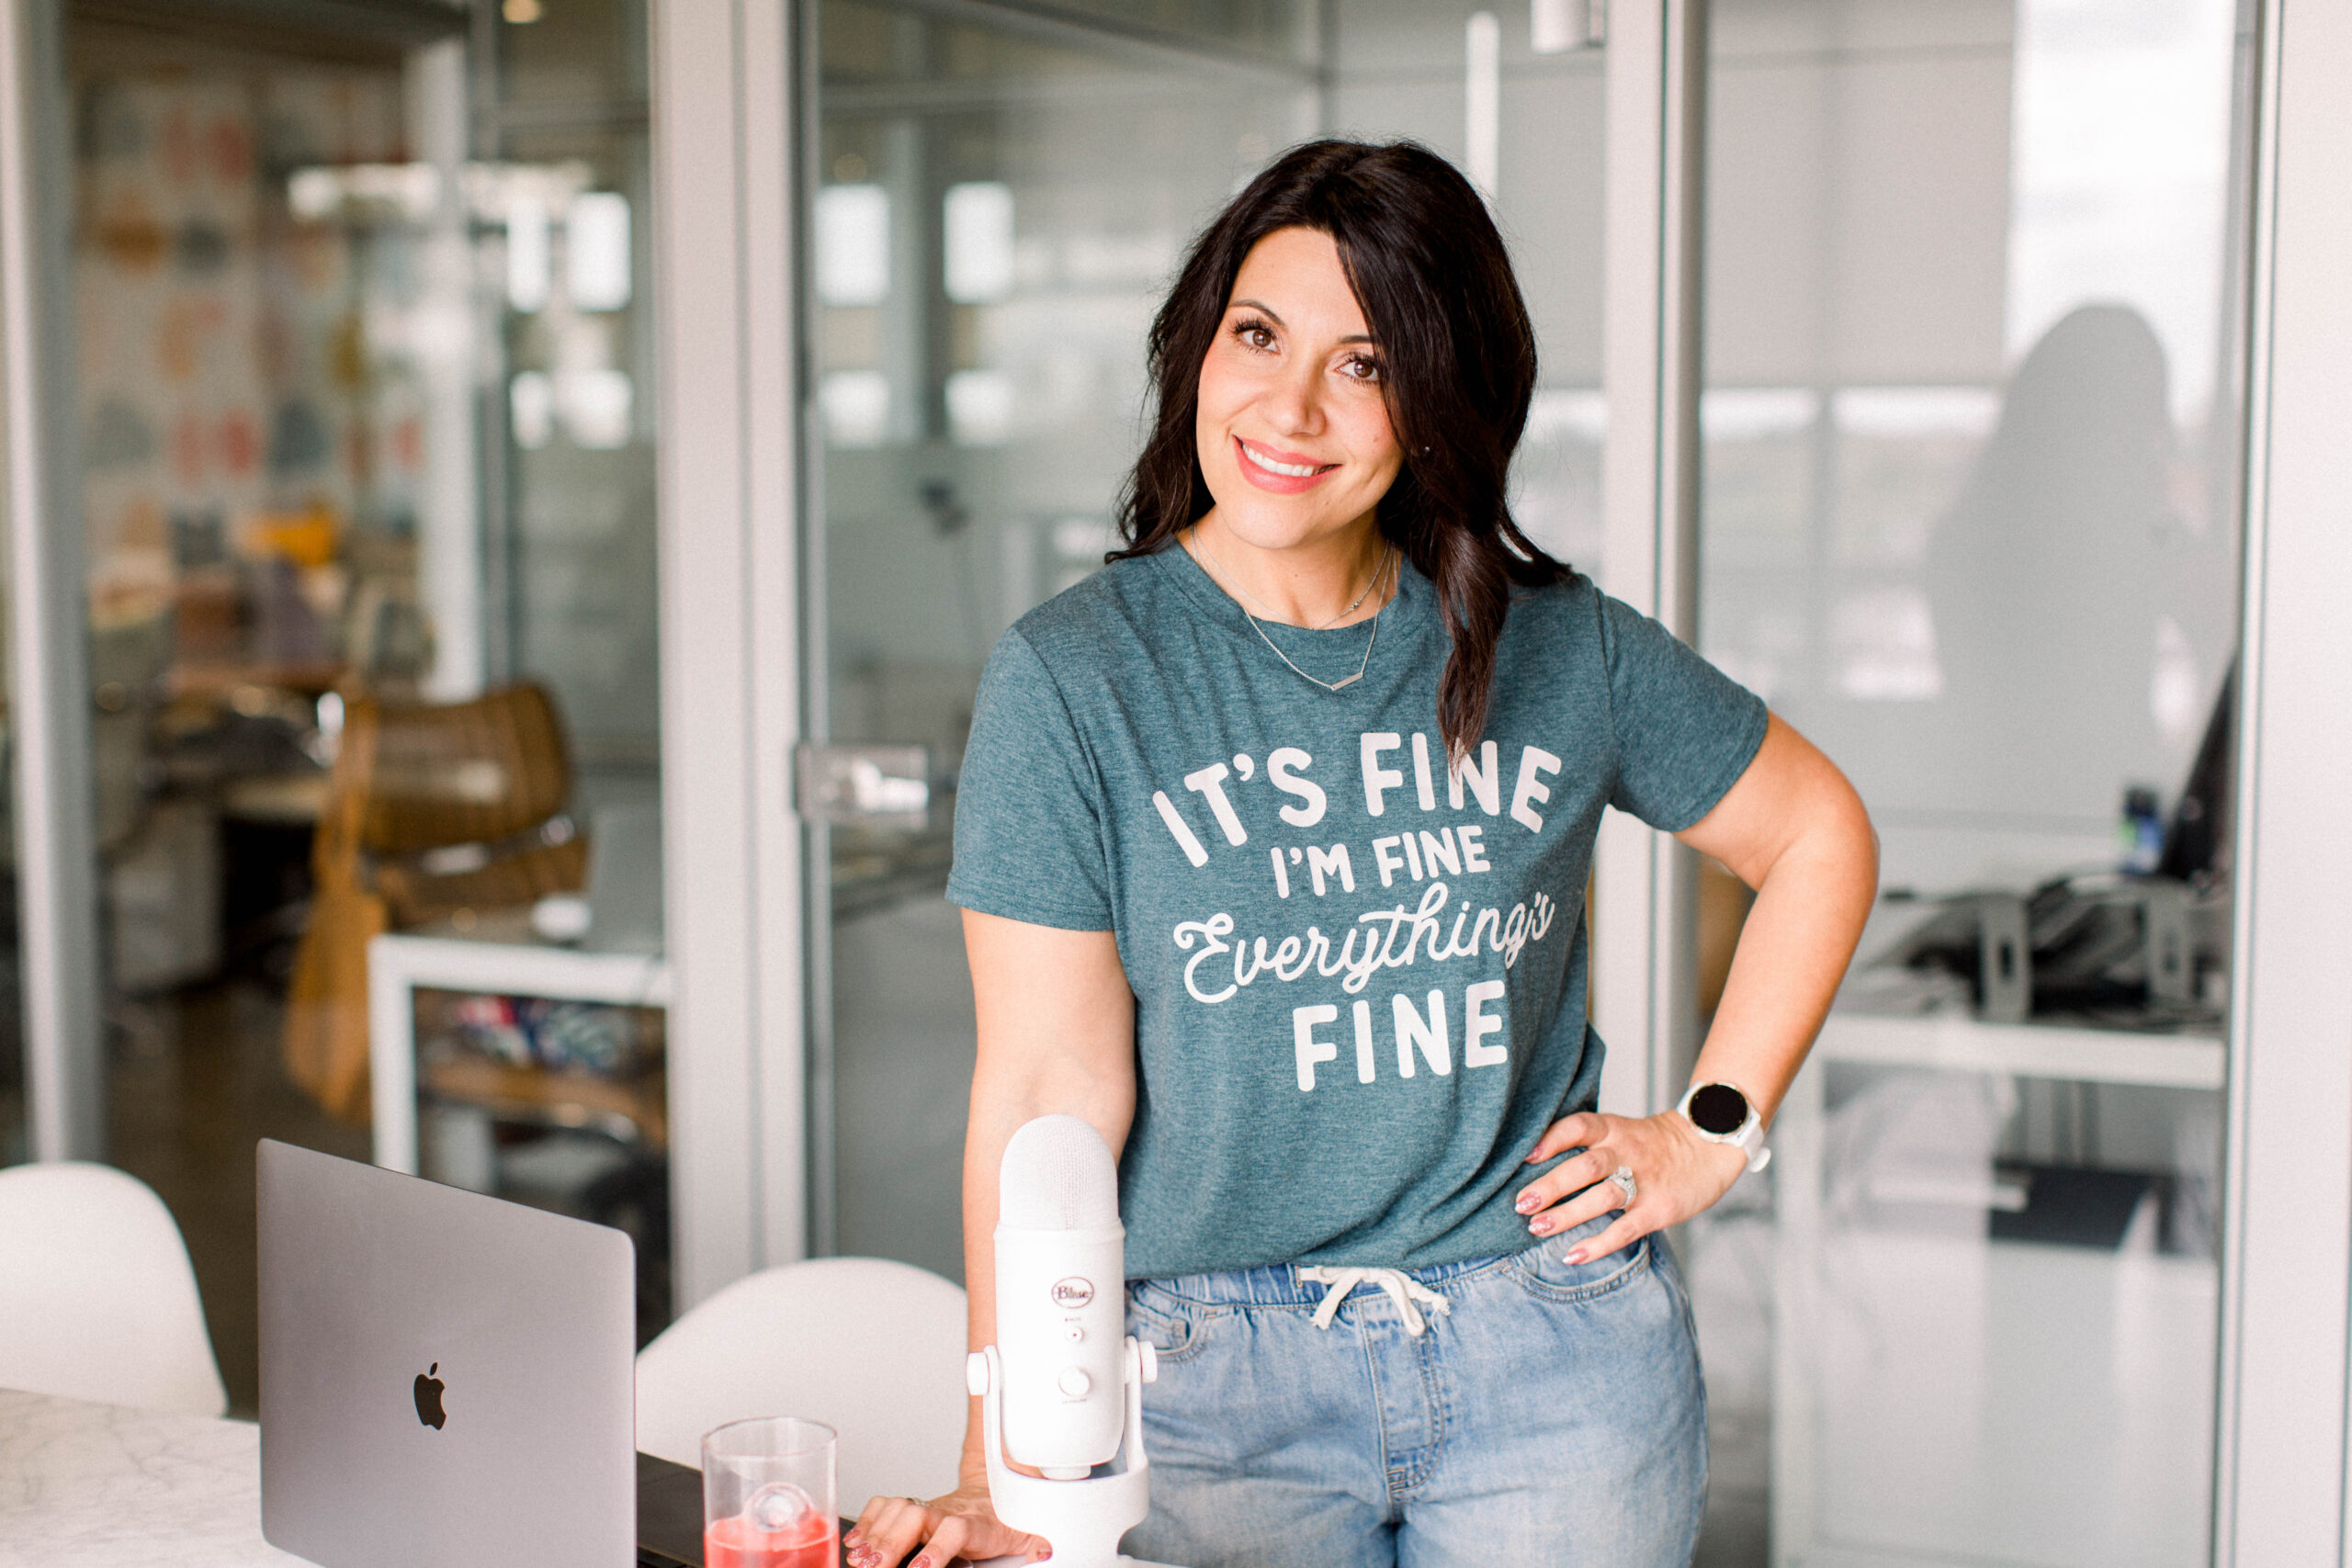 dark haired woman standing in front of a glass wall with a table in front of her. She is wearing a green t-shirt and jeans. There is an open laptopn and white microhpone on the table. Her left hand is on her hip and she is smiling toward the camera.